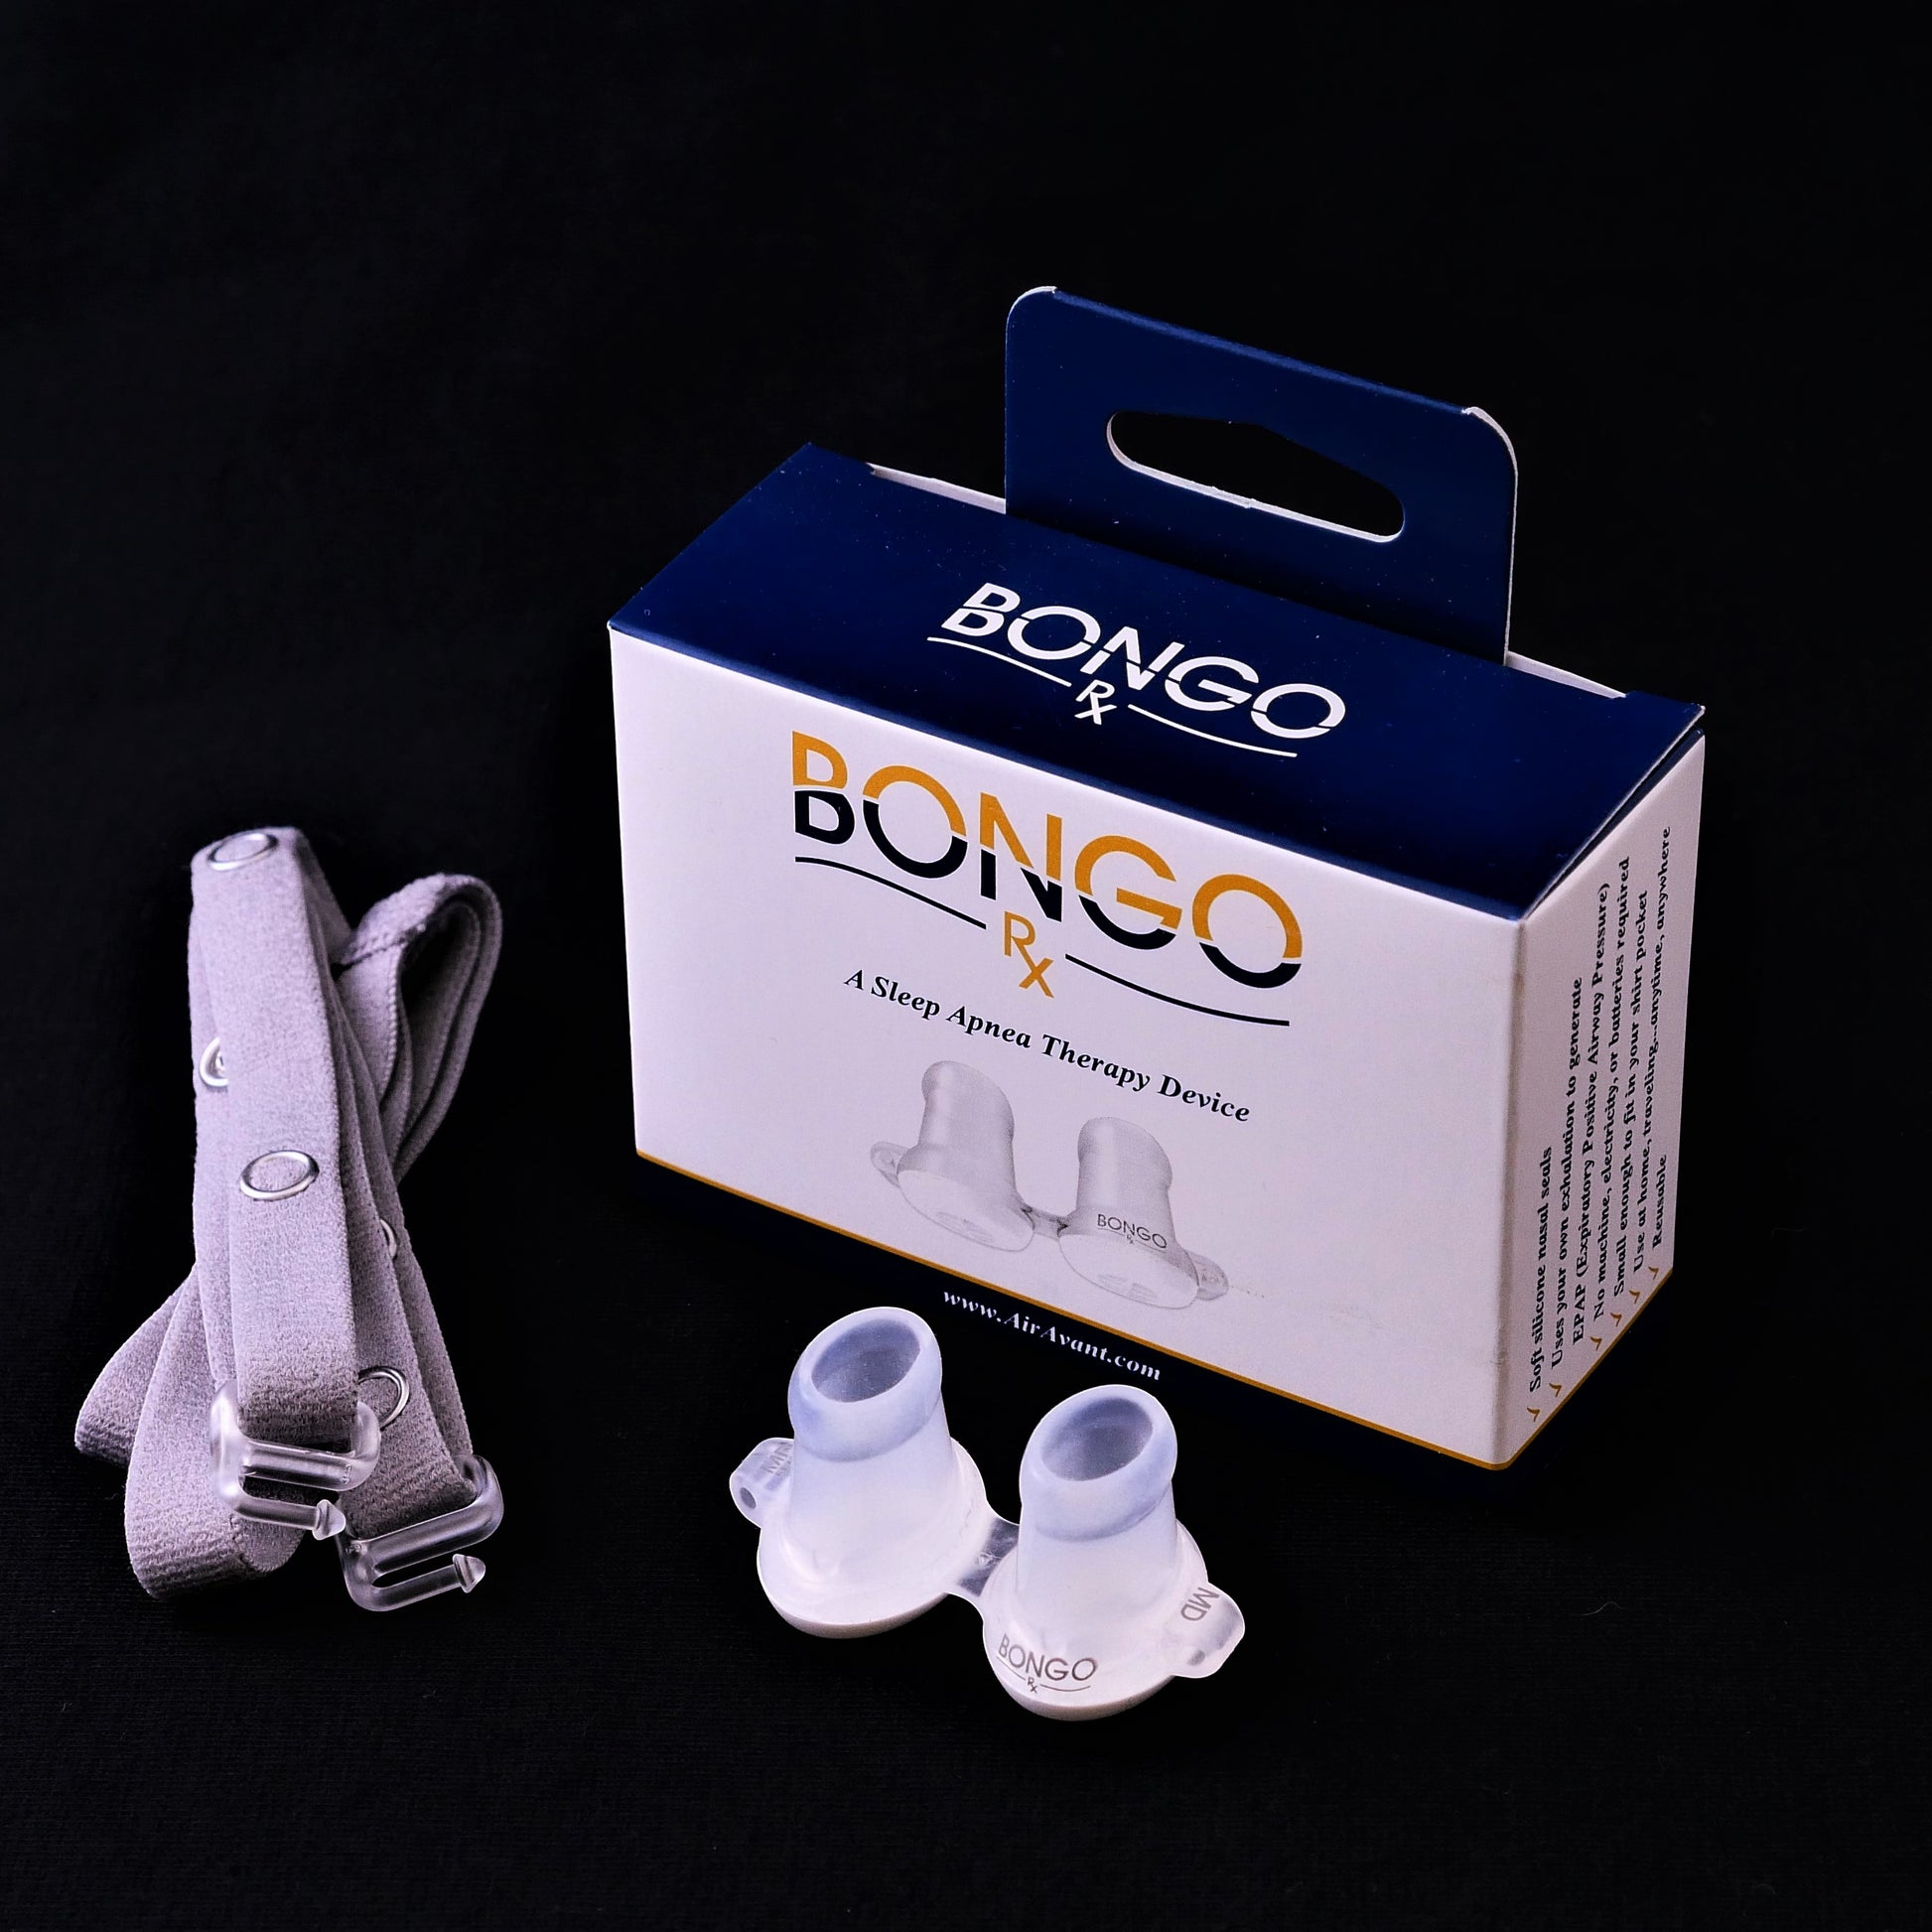 Bongo Rx Sleep Therapy Device including packaging and headgear